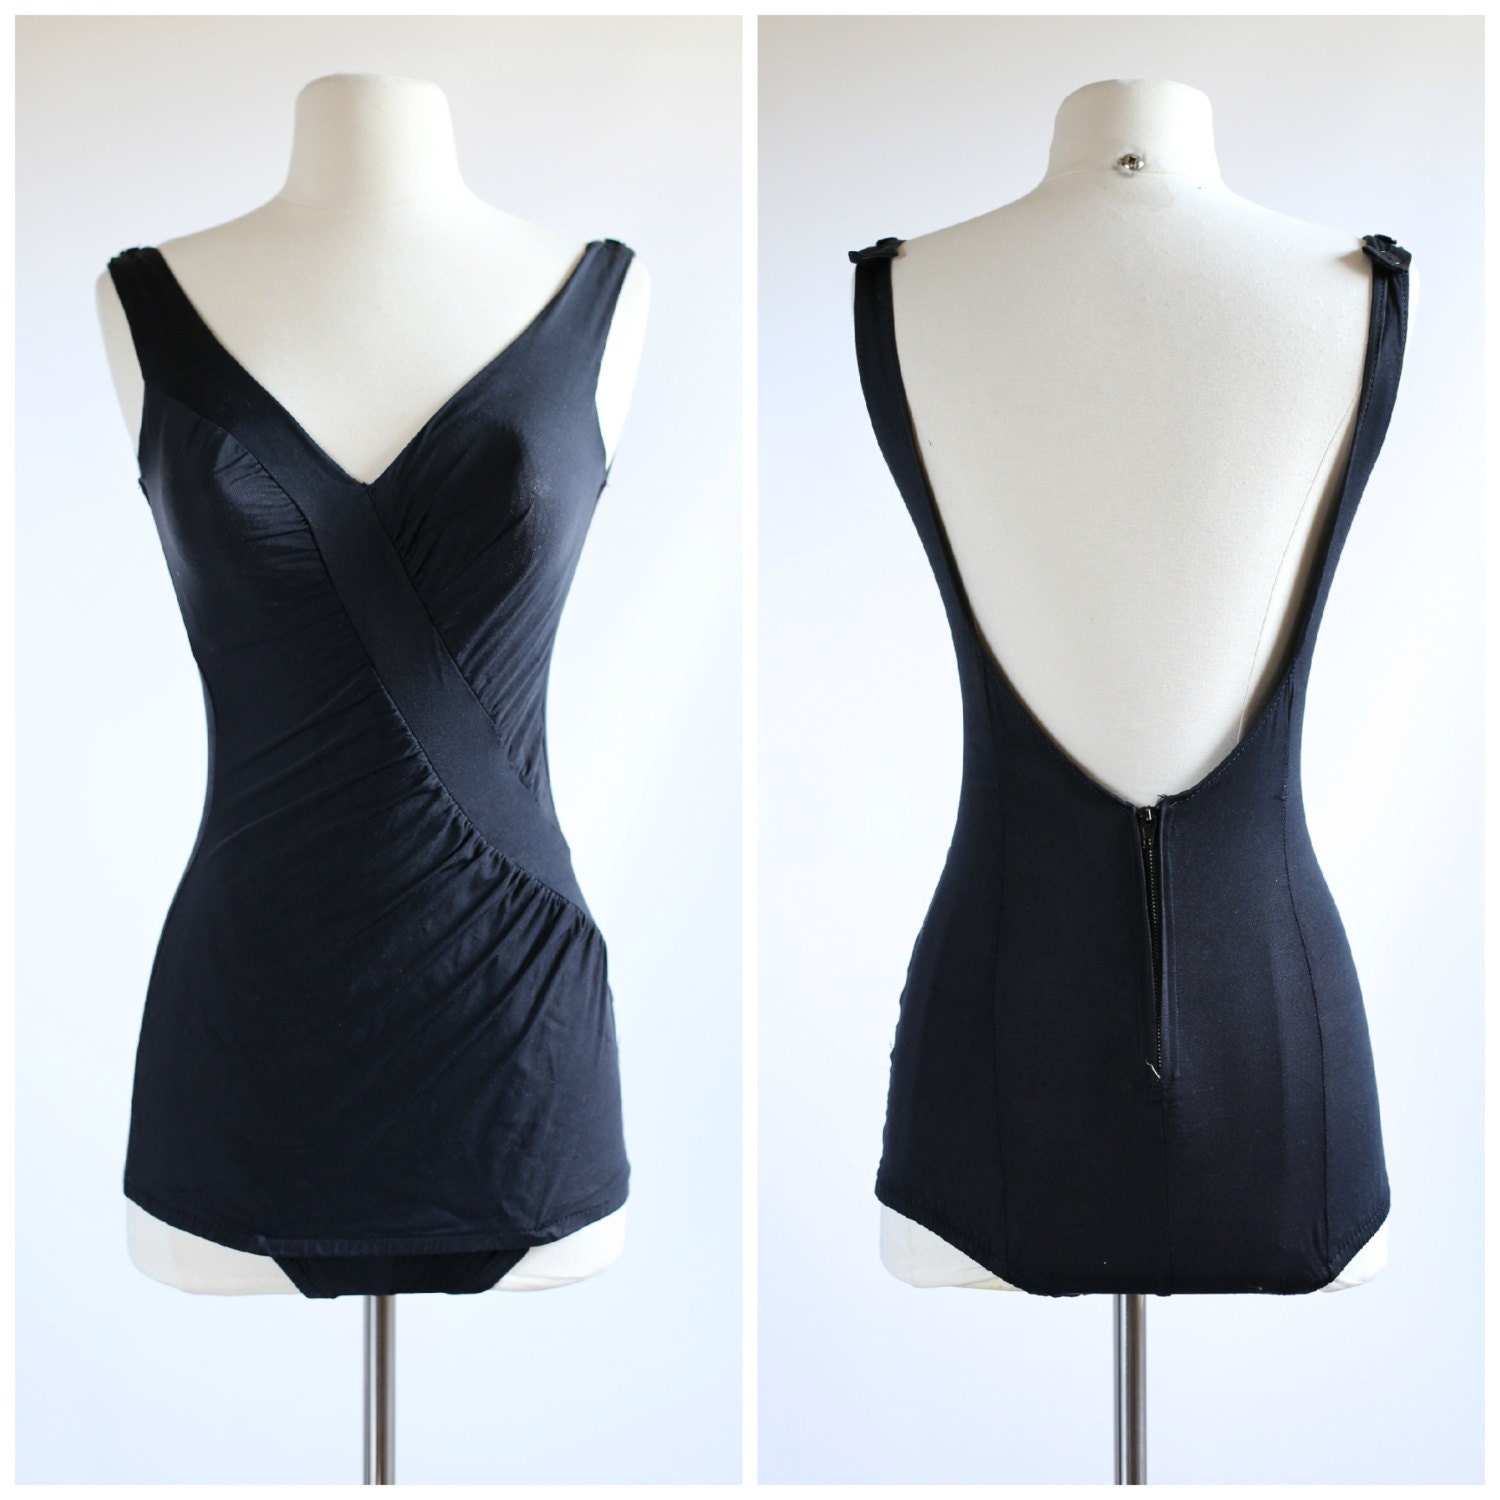 Vintage 1950s Pin Up Style Swimsuit Vintage 50s Black